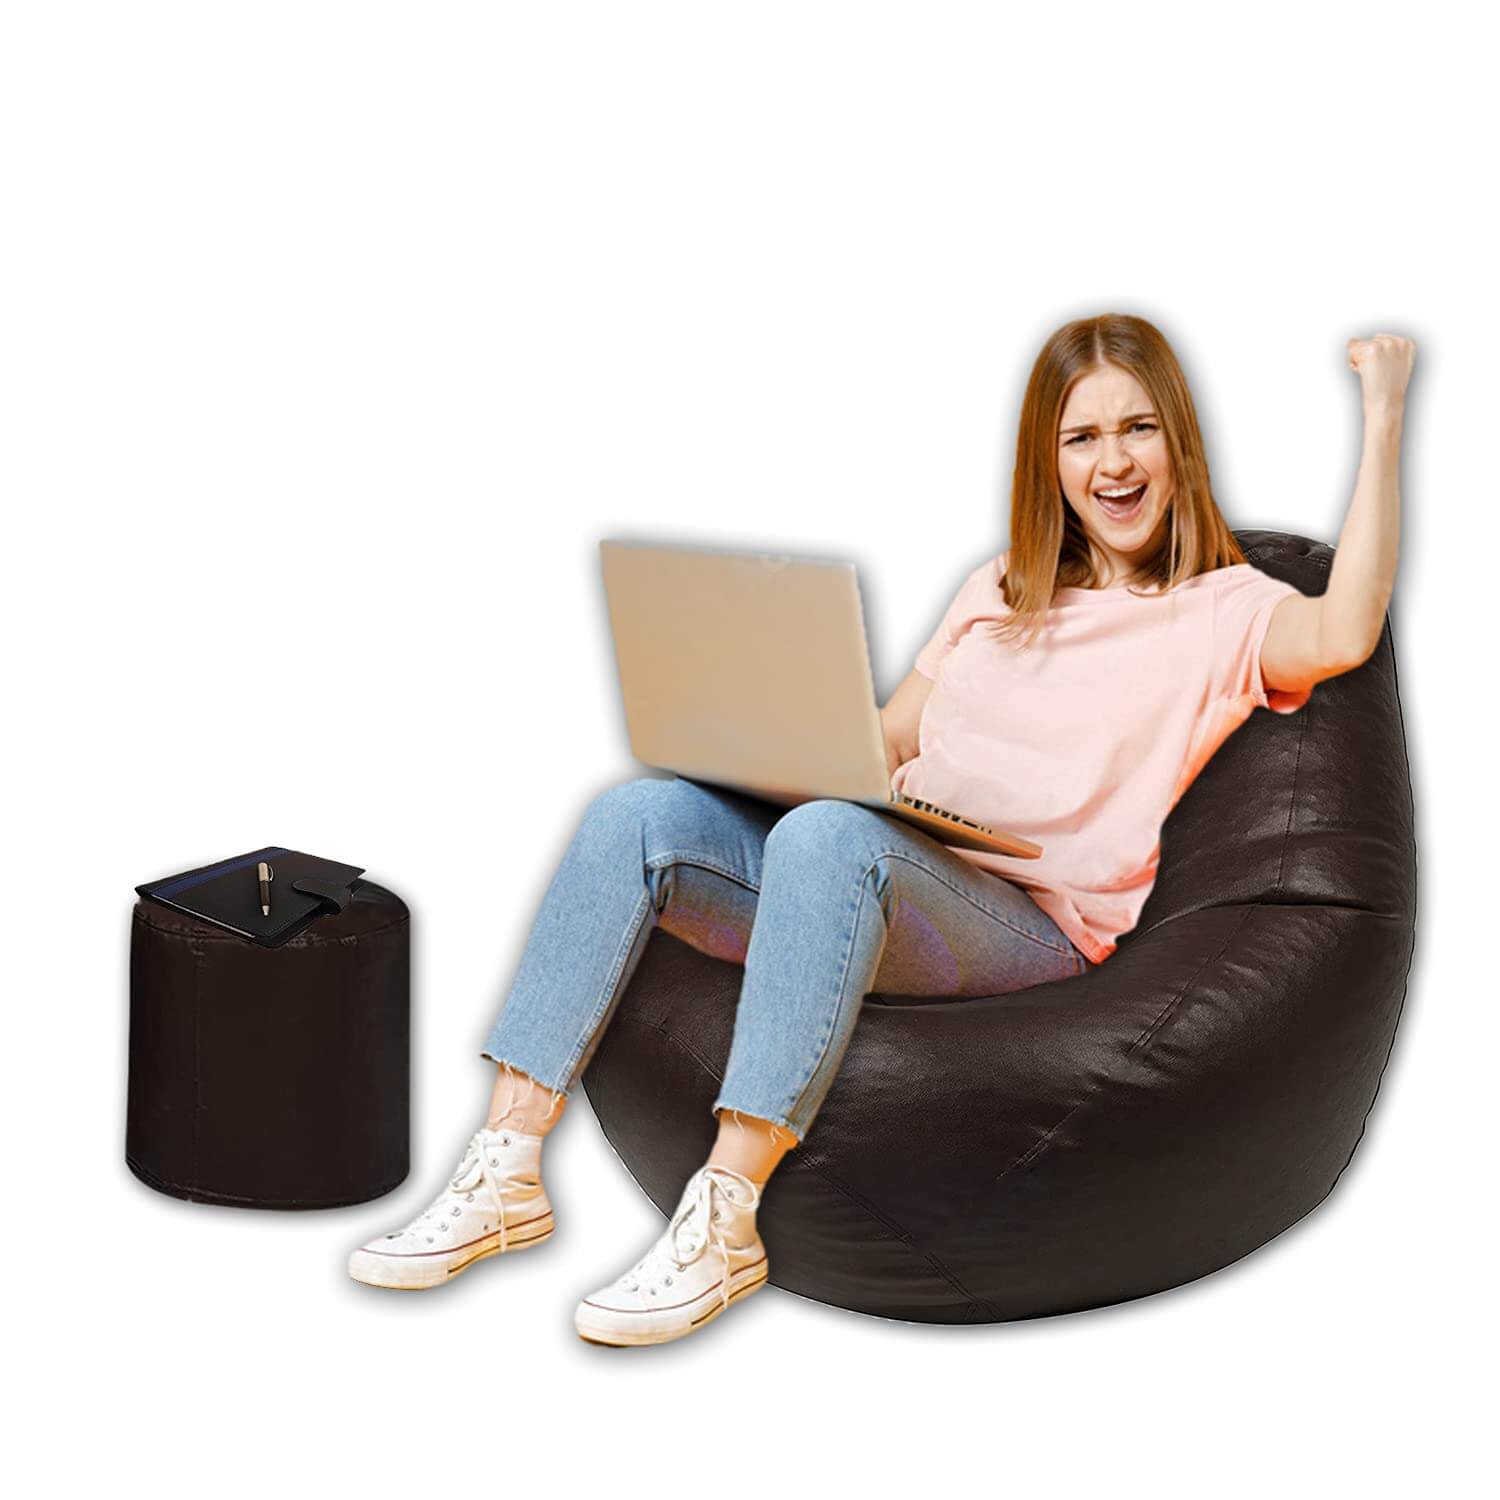 Best Bean Bag Chairs 2023 - Tested Review - Forbes Vetted